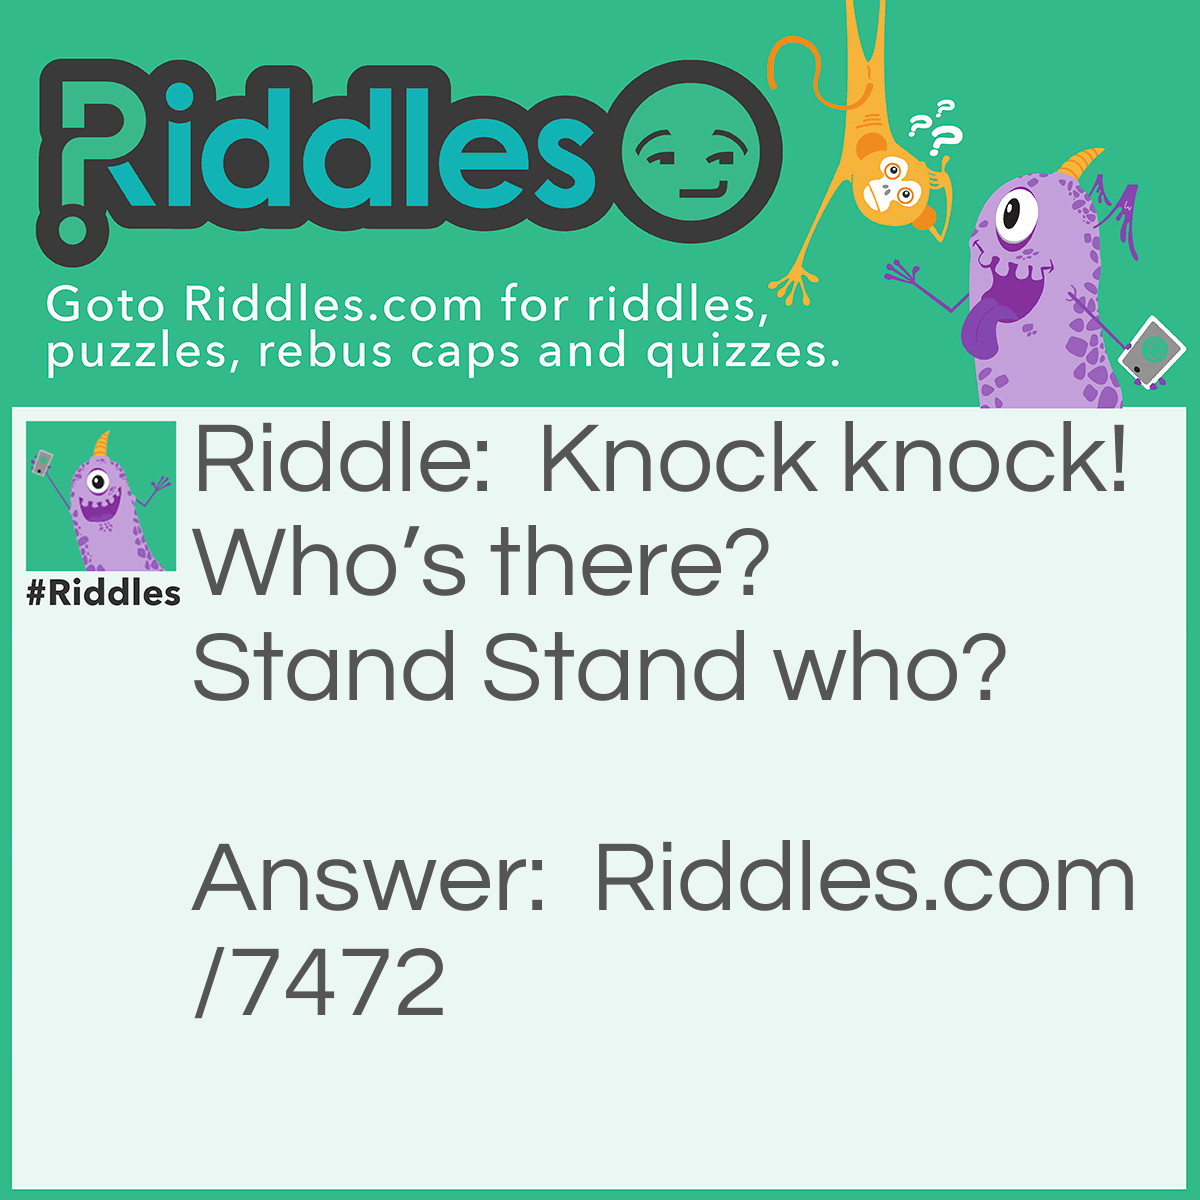 Riddle: Knock knock! Who's there? Stand Stand who? Answer: Stand back because I am going to kick the door down!